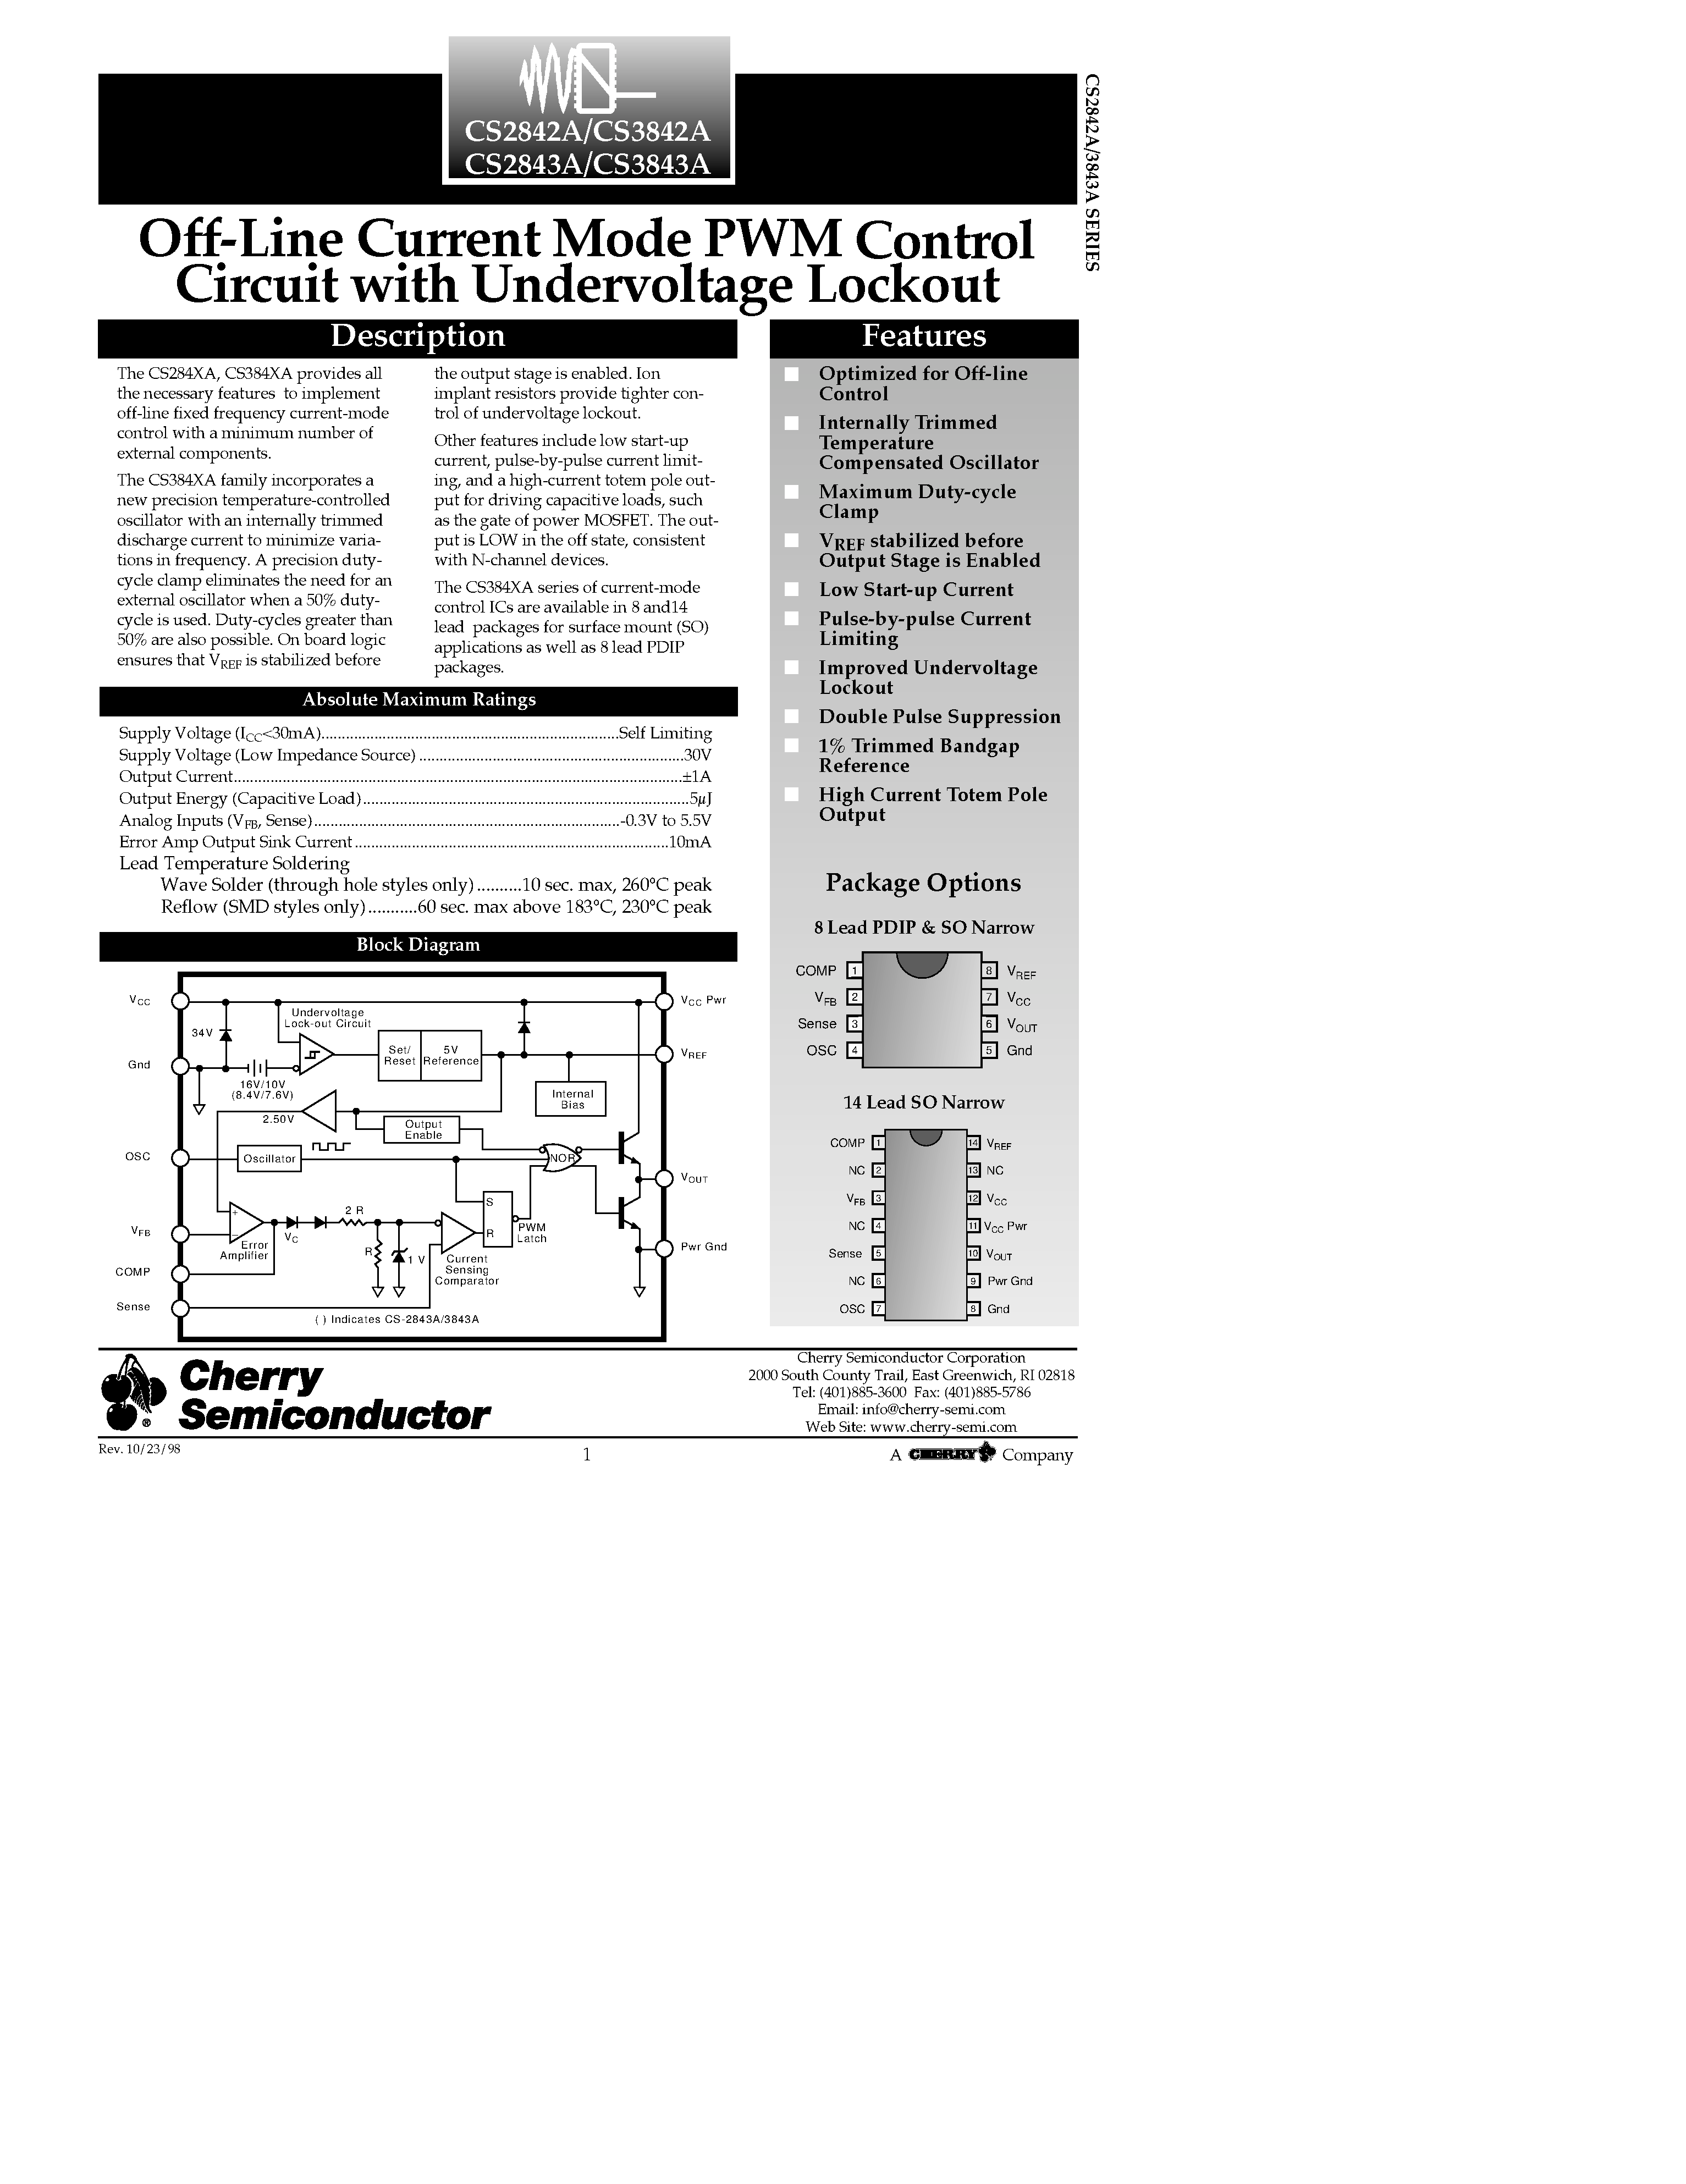 Datasheet CS2843ALN8 - Off-Line Current Mode PWM Control Circuit with Undervoltage Lockout page 1